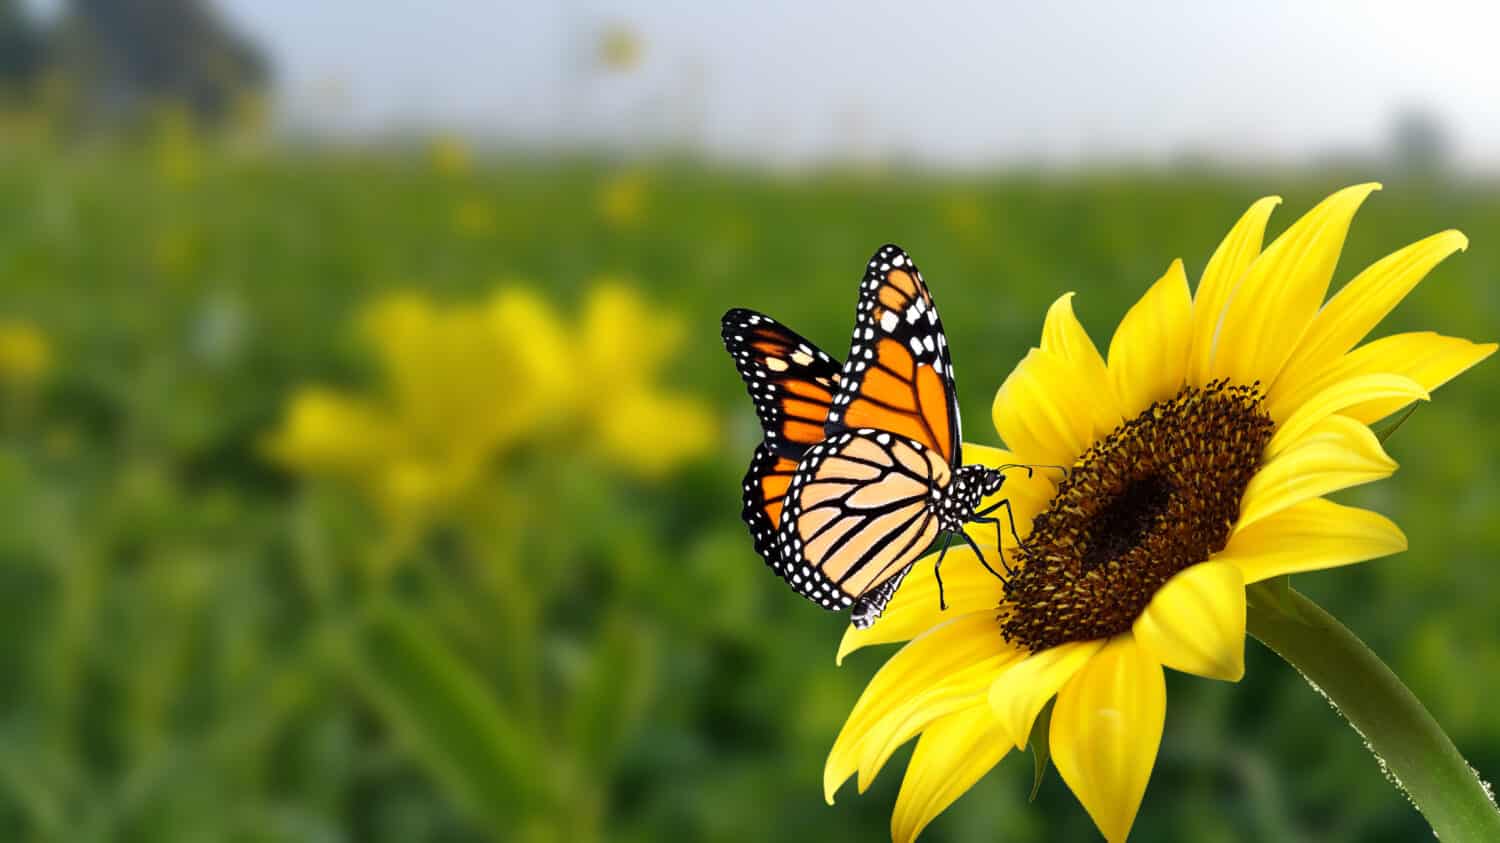 monarch butterfly on flower. Image of a butterfly Monarch on sunflower with blurry background. Nature stock image of a closeup insect. Most beautiful imaging of a wings butterfly on flowers.